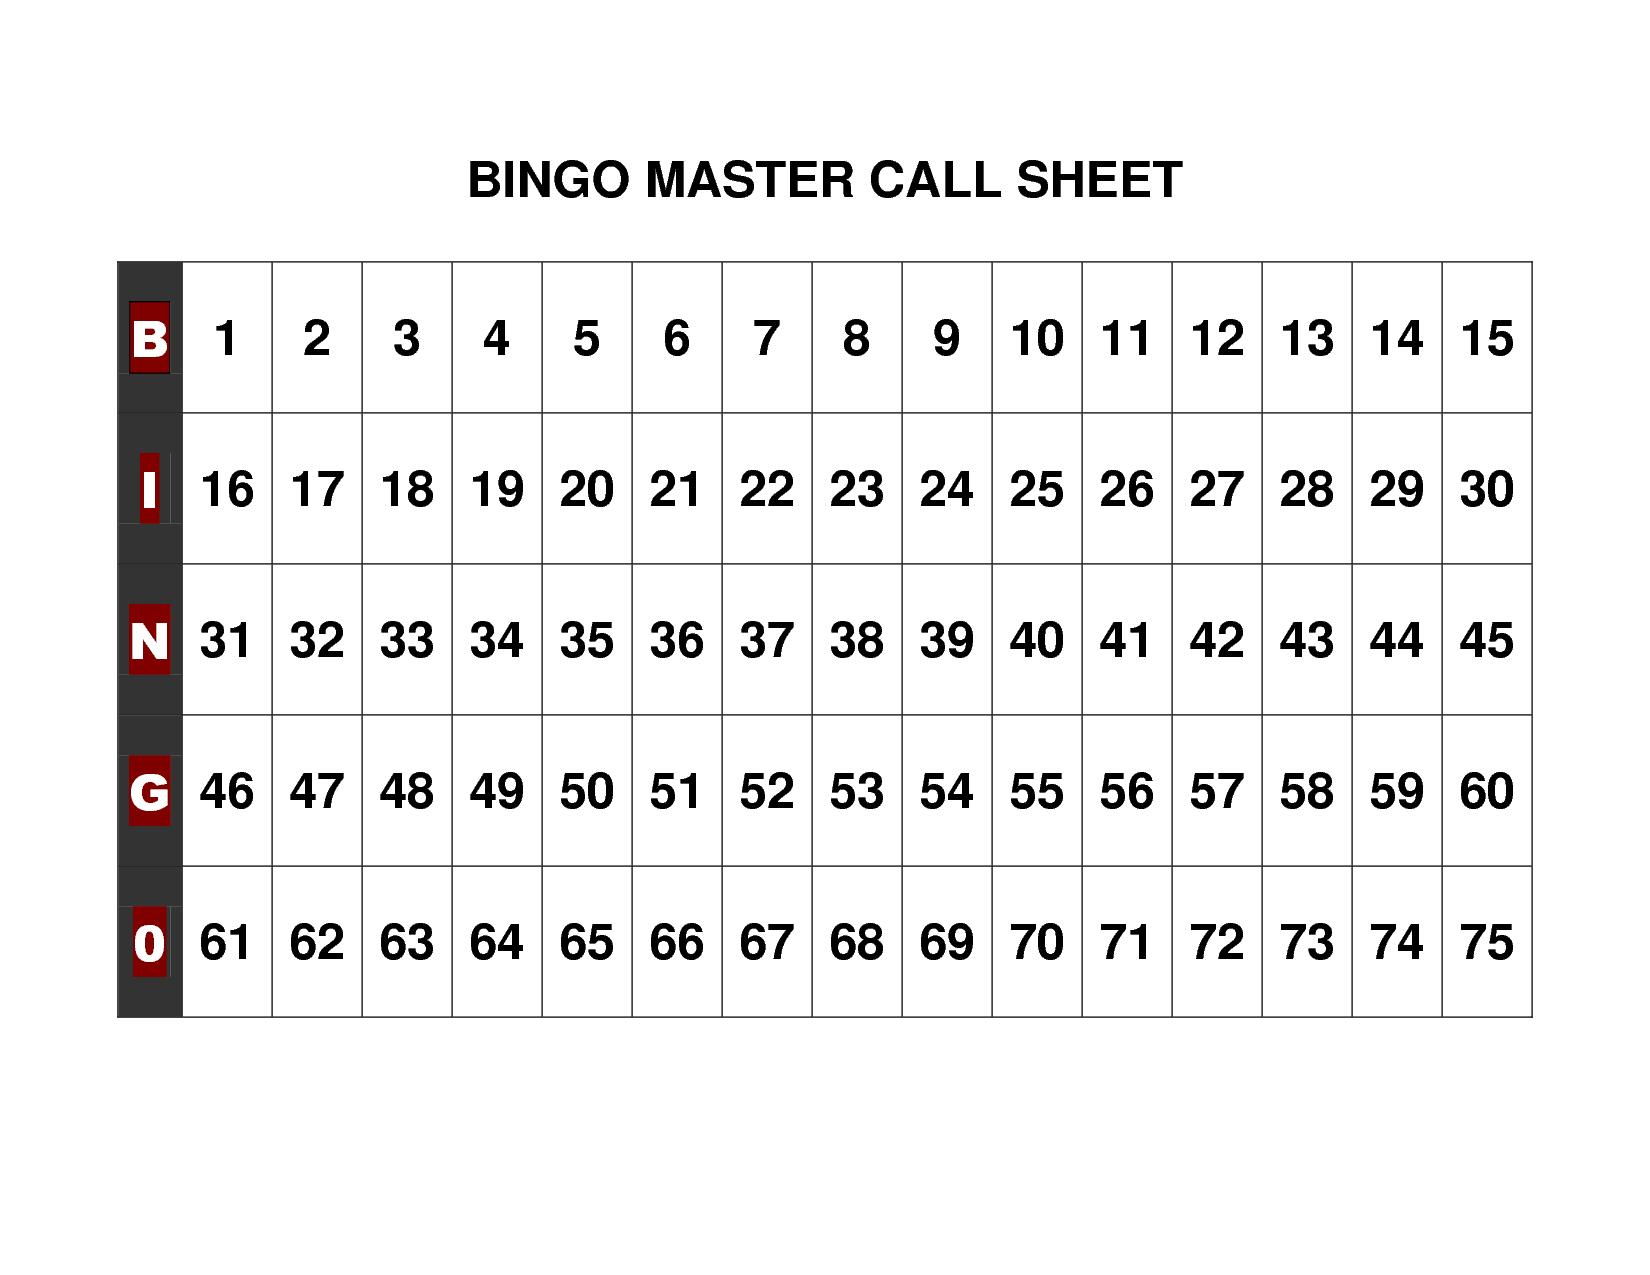 Bingo Numbers For Each Letter